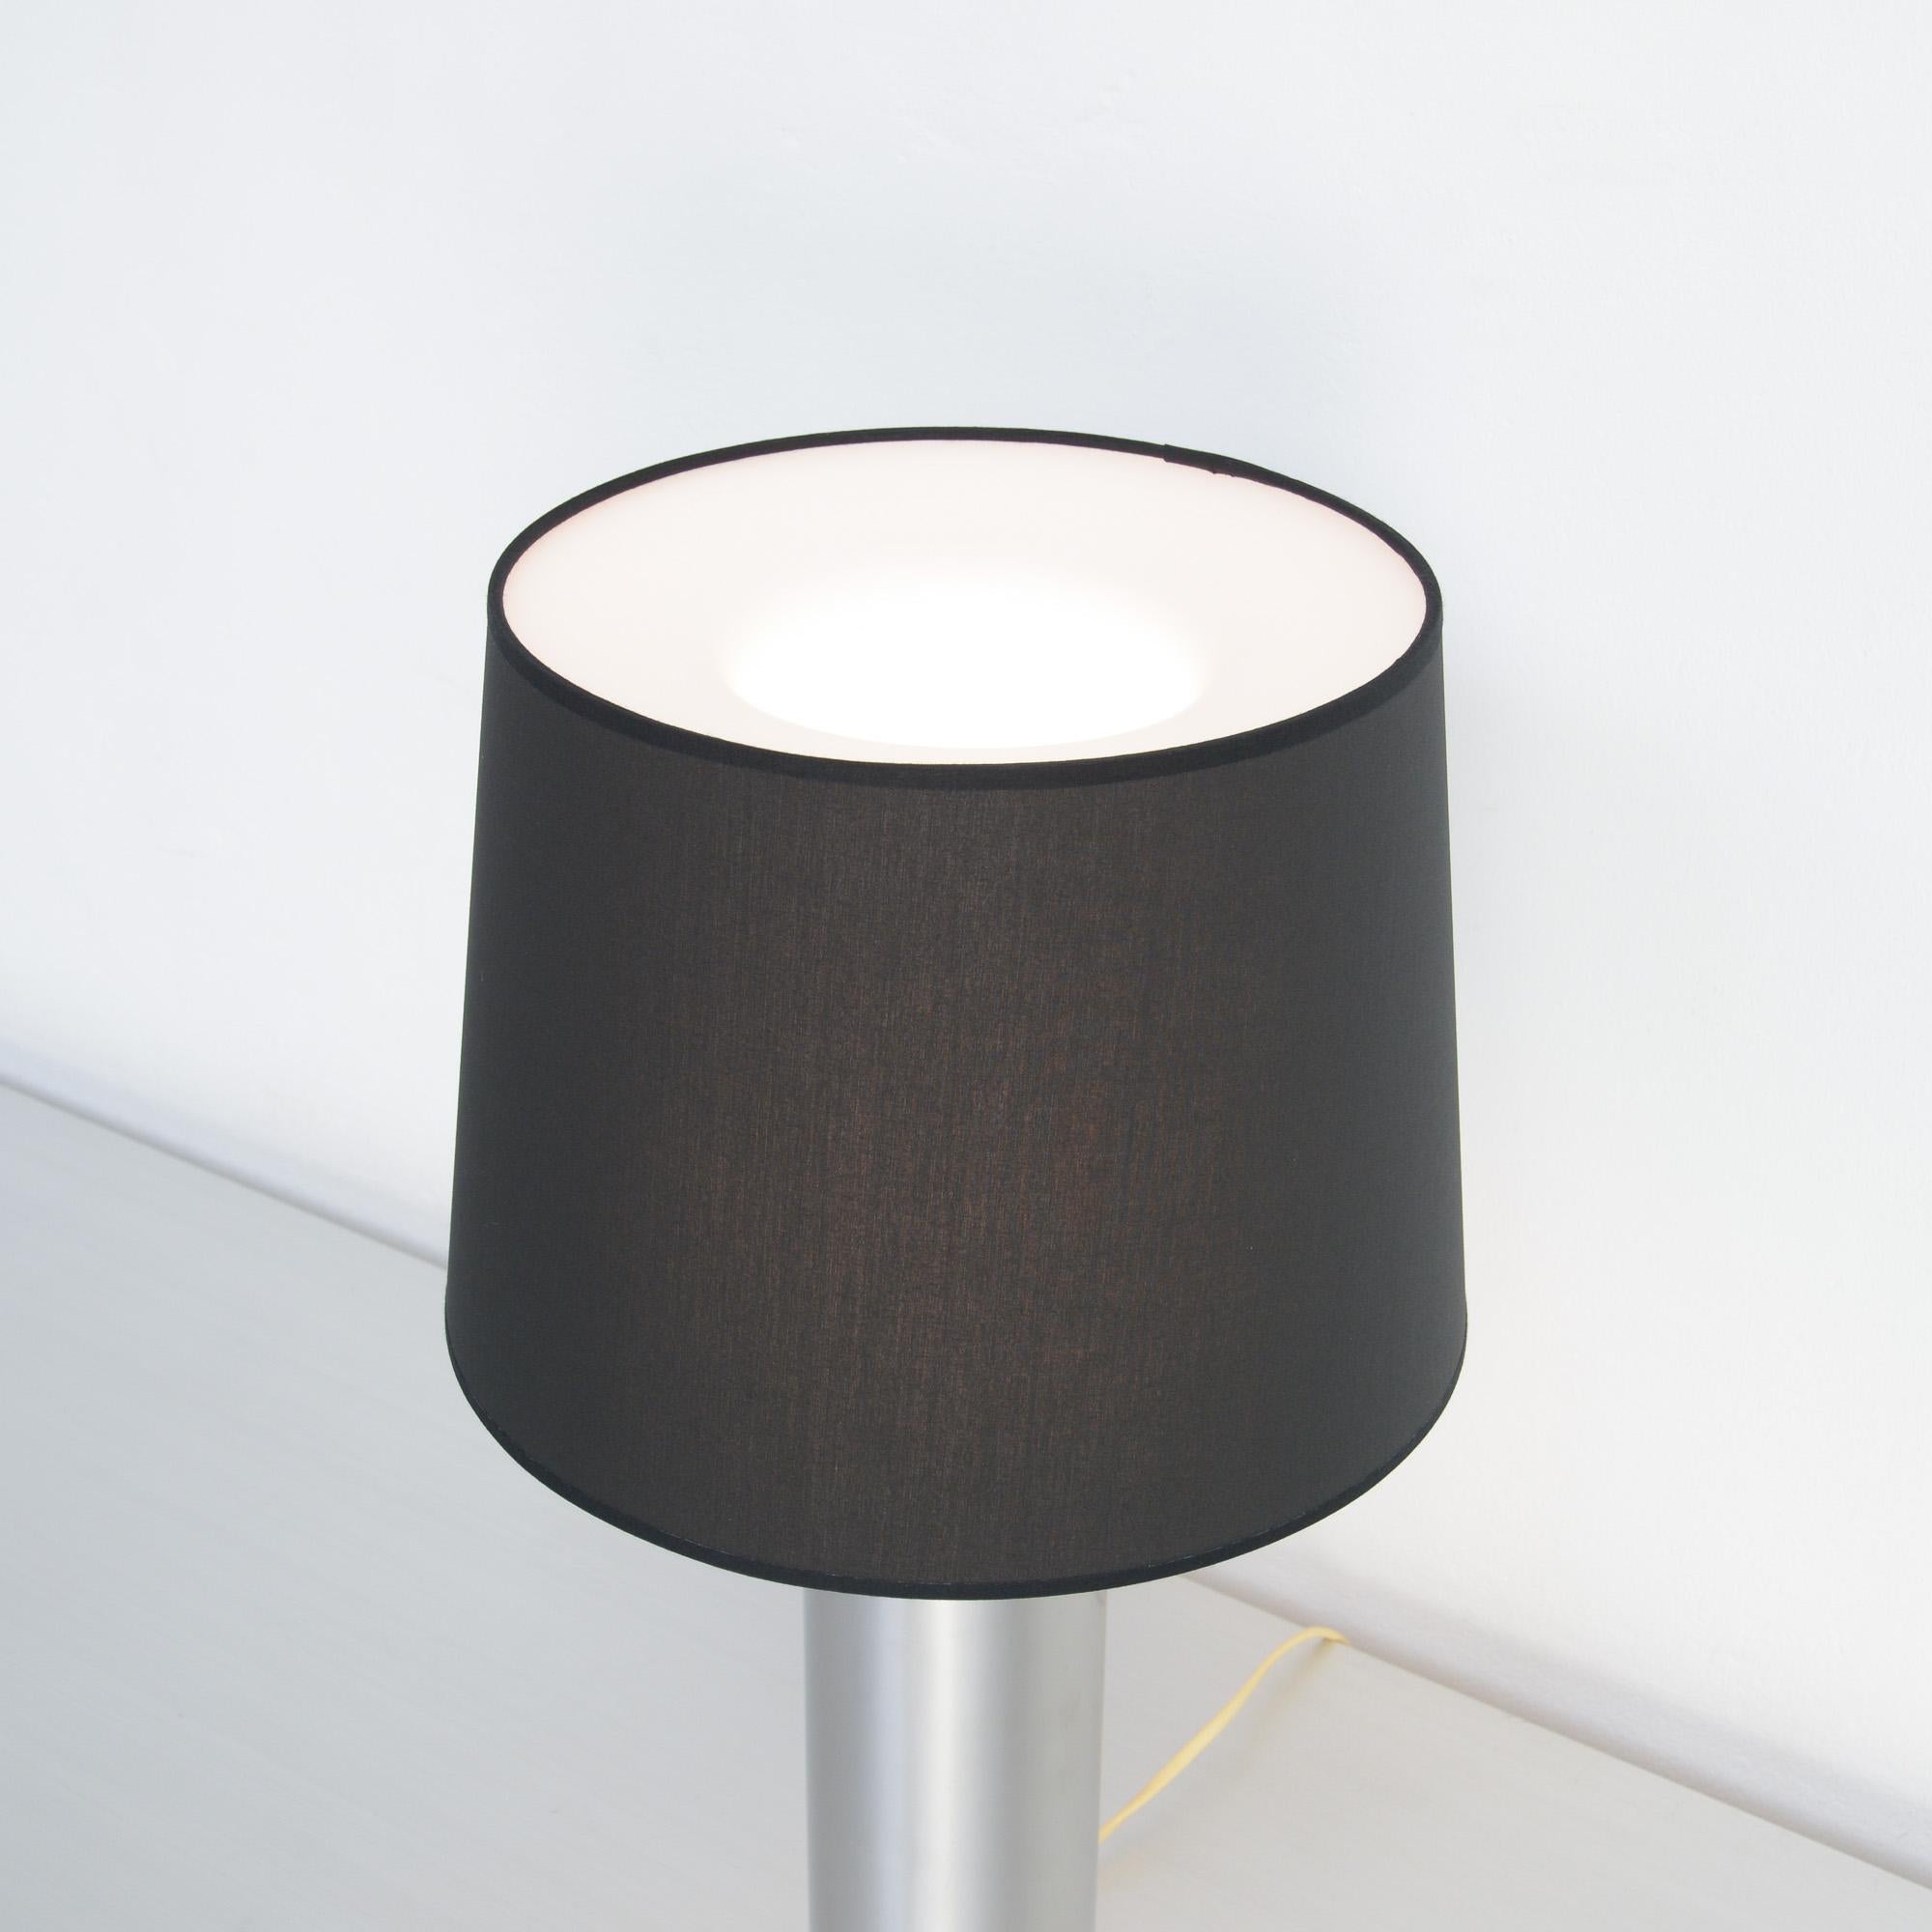 This Minimalist Scandinavian table lamp was designed by Uno & Östen Kristiansson for Luxus in Sweden in the 1960s.
This lamp is made of a chromed steel cylinder with rosewood details. The white perspex diffuser is covered with a black lampshade.